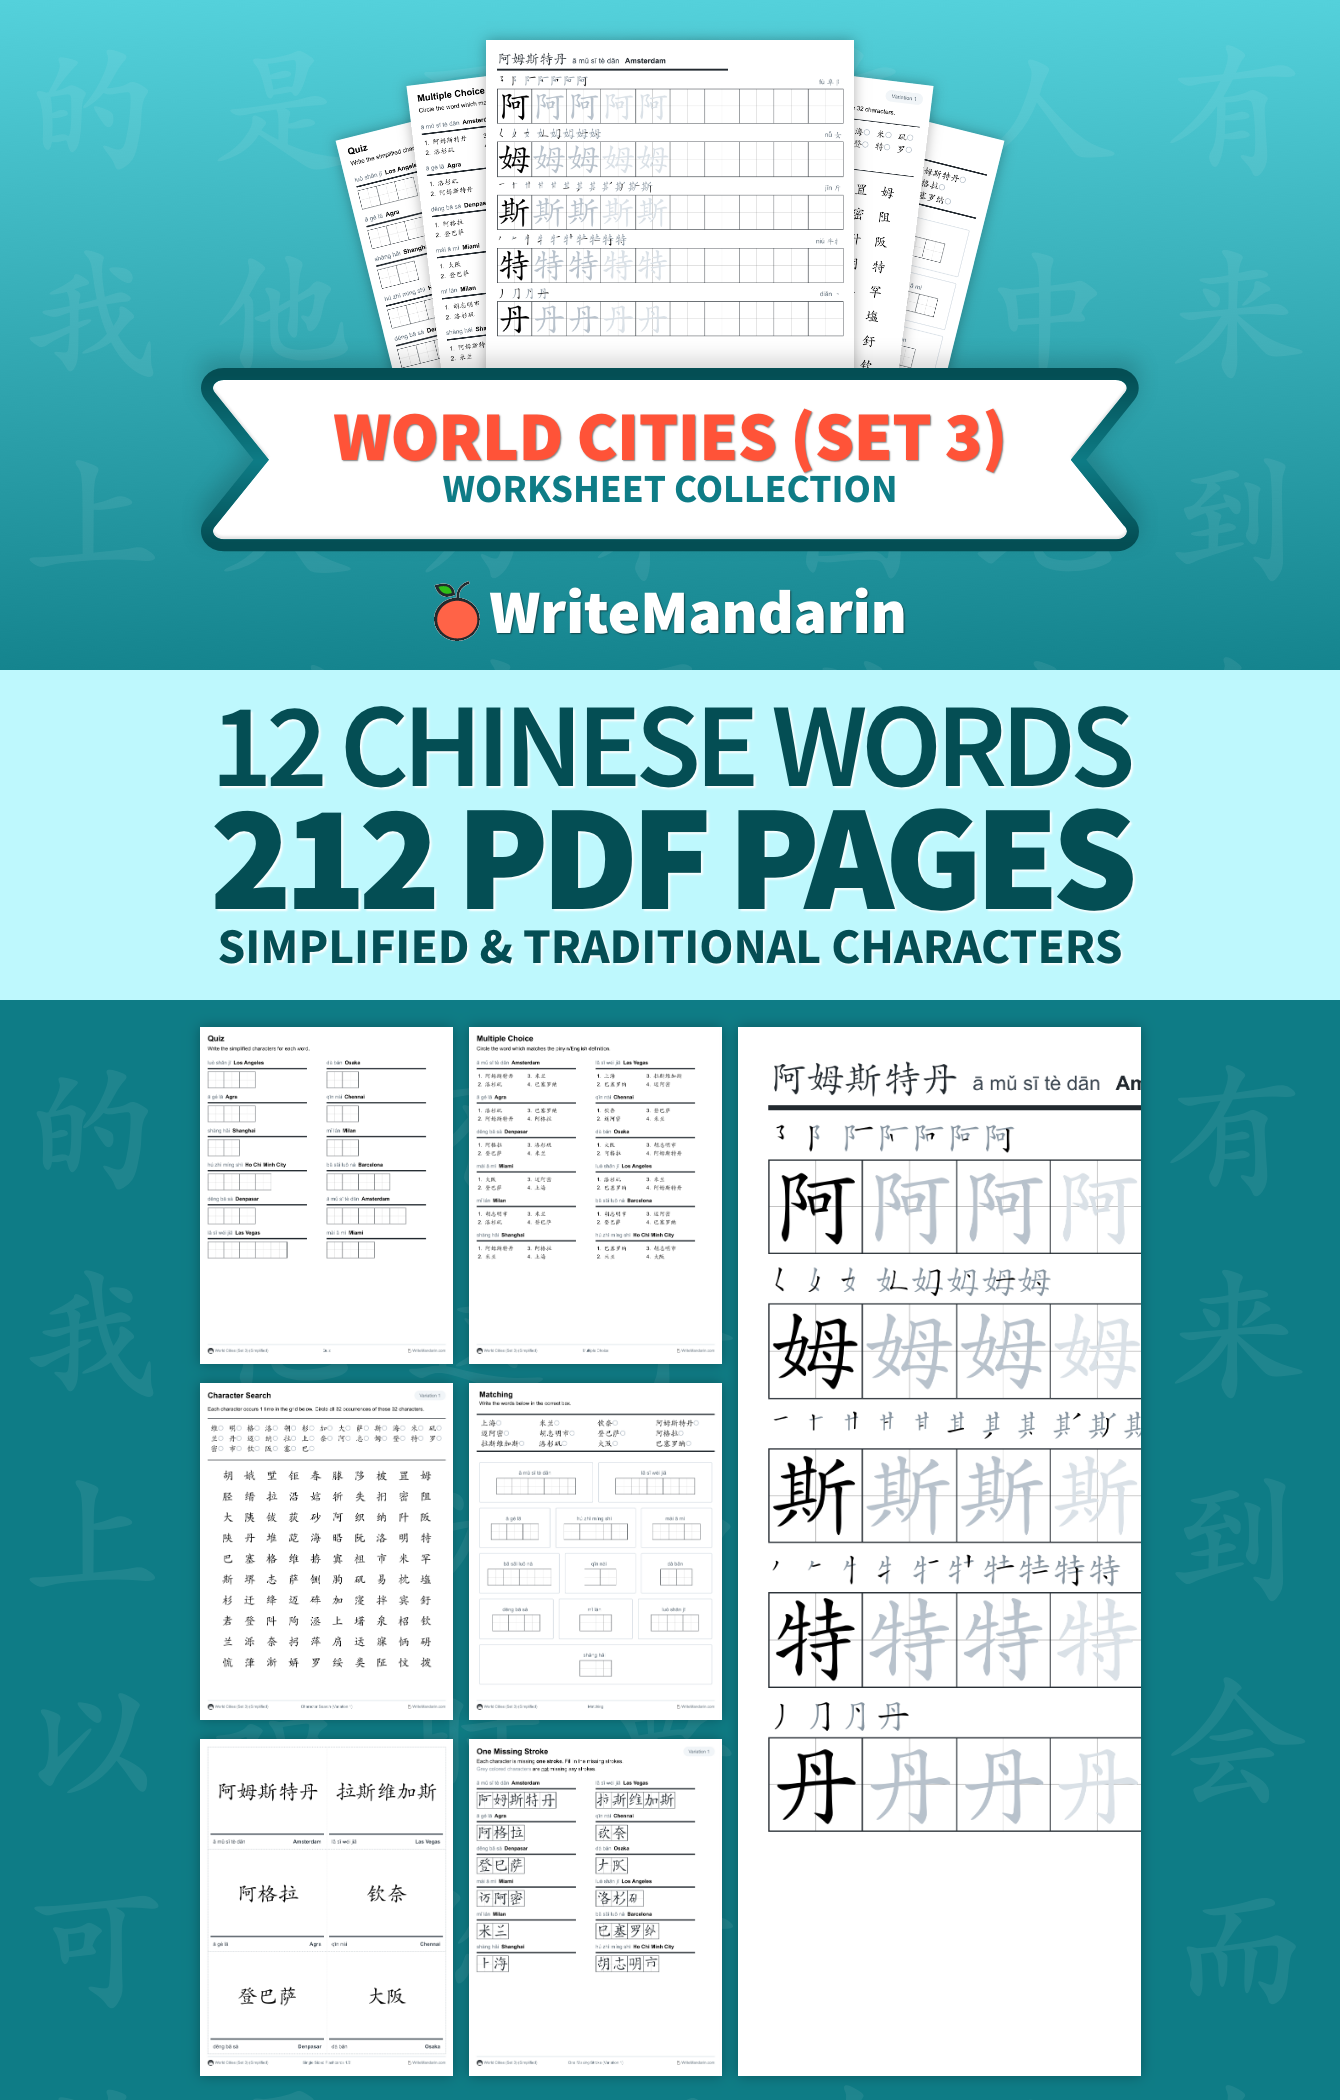 Preview image of World Cities (Set 3) worksheet collection